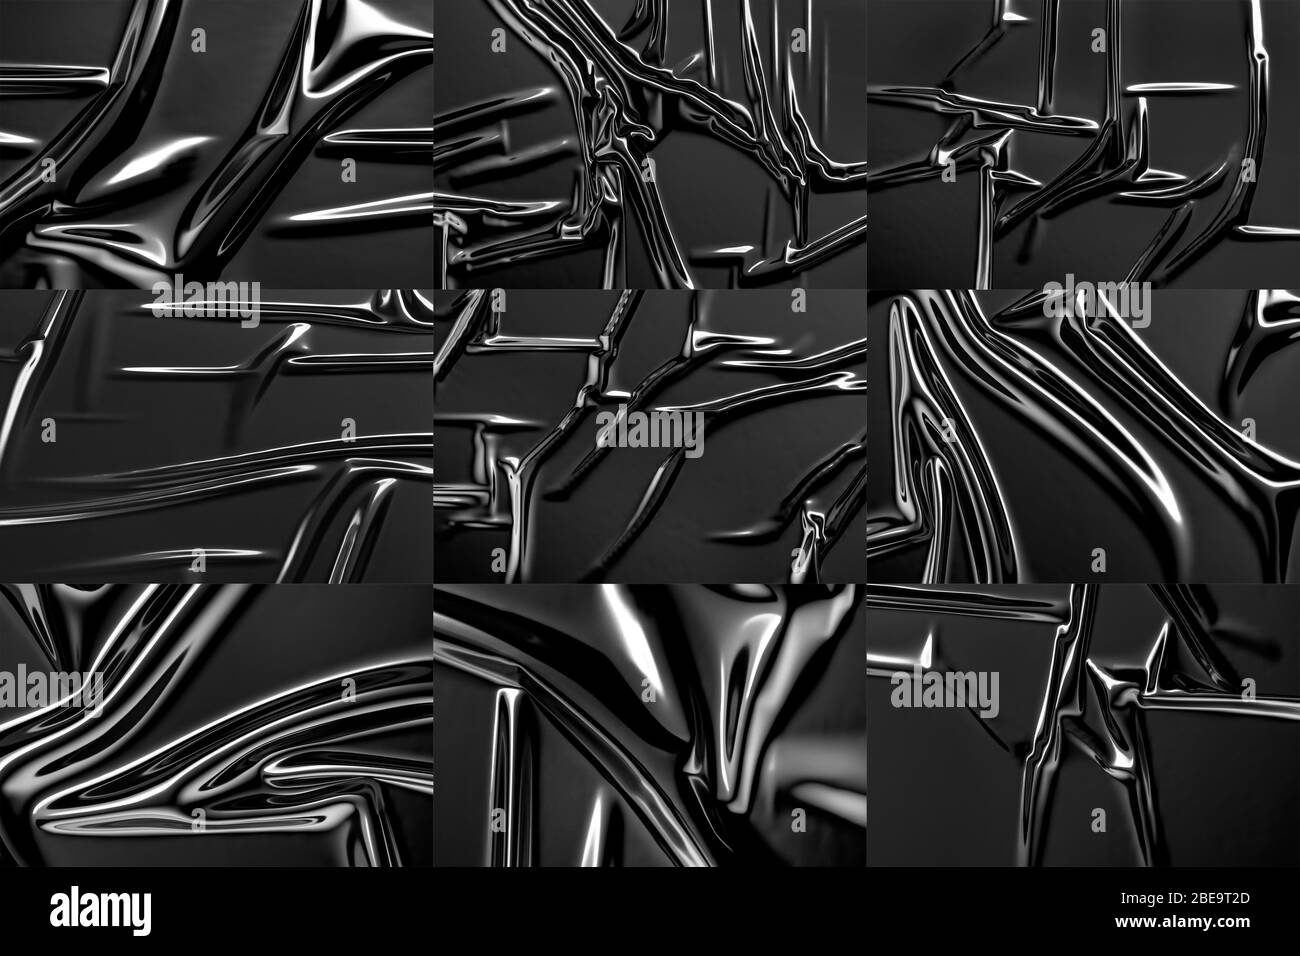 Download Blank Black Crumpled Plastic Foil Wrap Overlay Mock Up Stock Photo Alamy